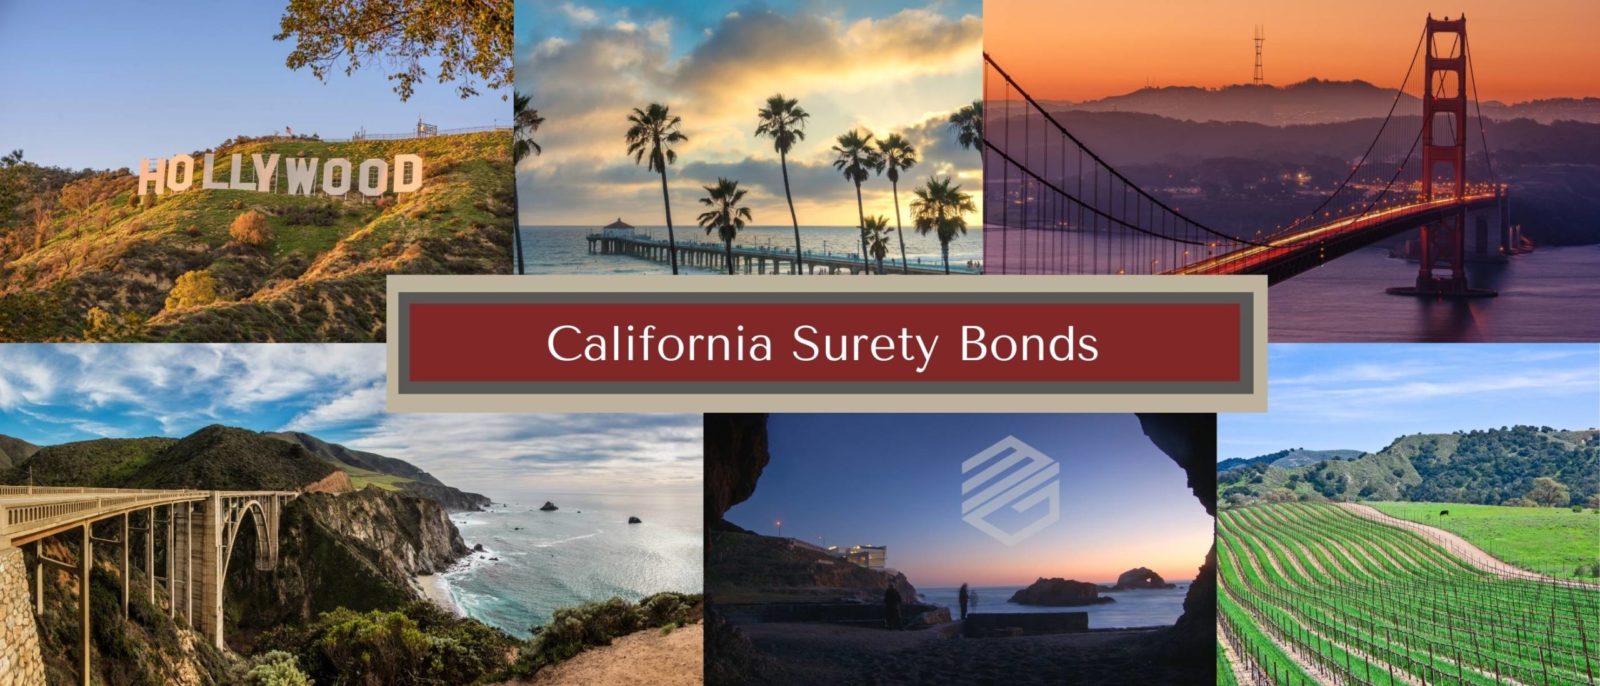 California Surety Bonds - Six pictures representing California including The Golden Gate Bridge, palm trees, a wine vineyard, the Hollywood sign and a beach. The words, "California Surety Bonds" in a text box.